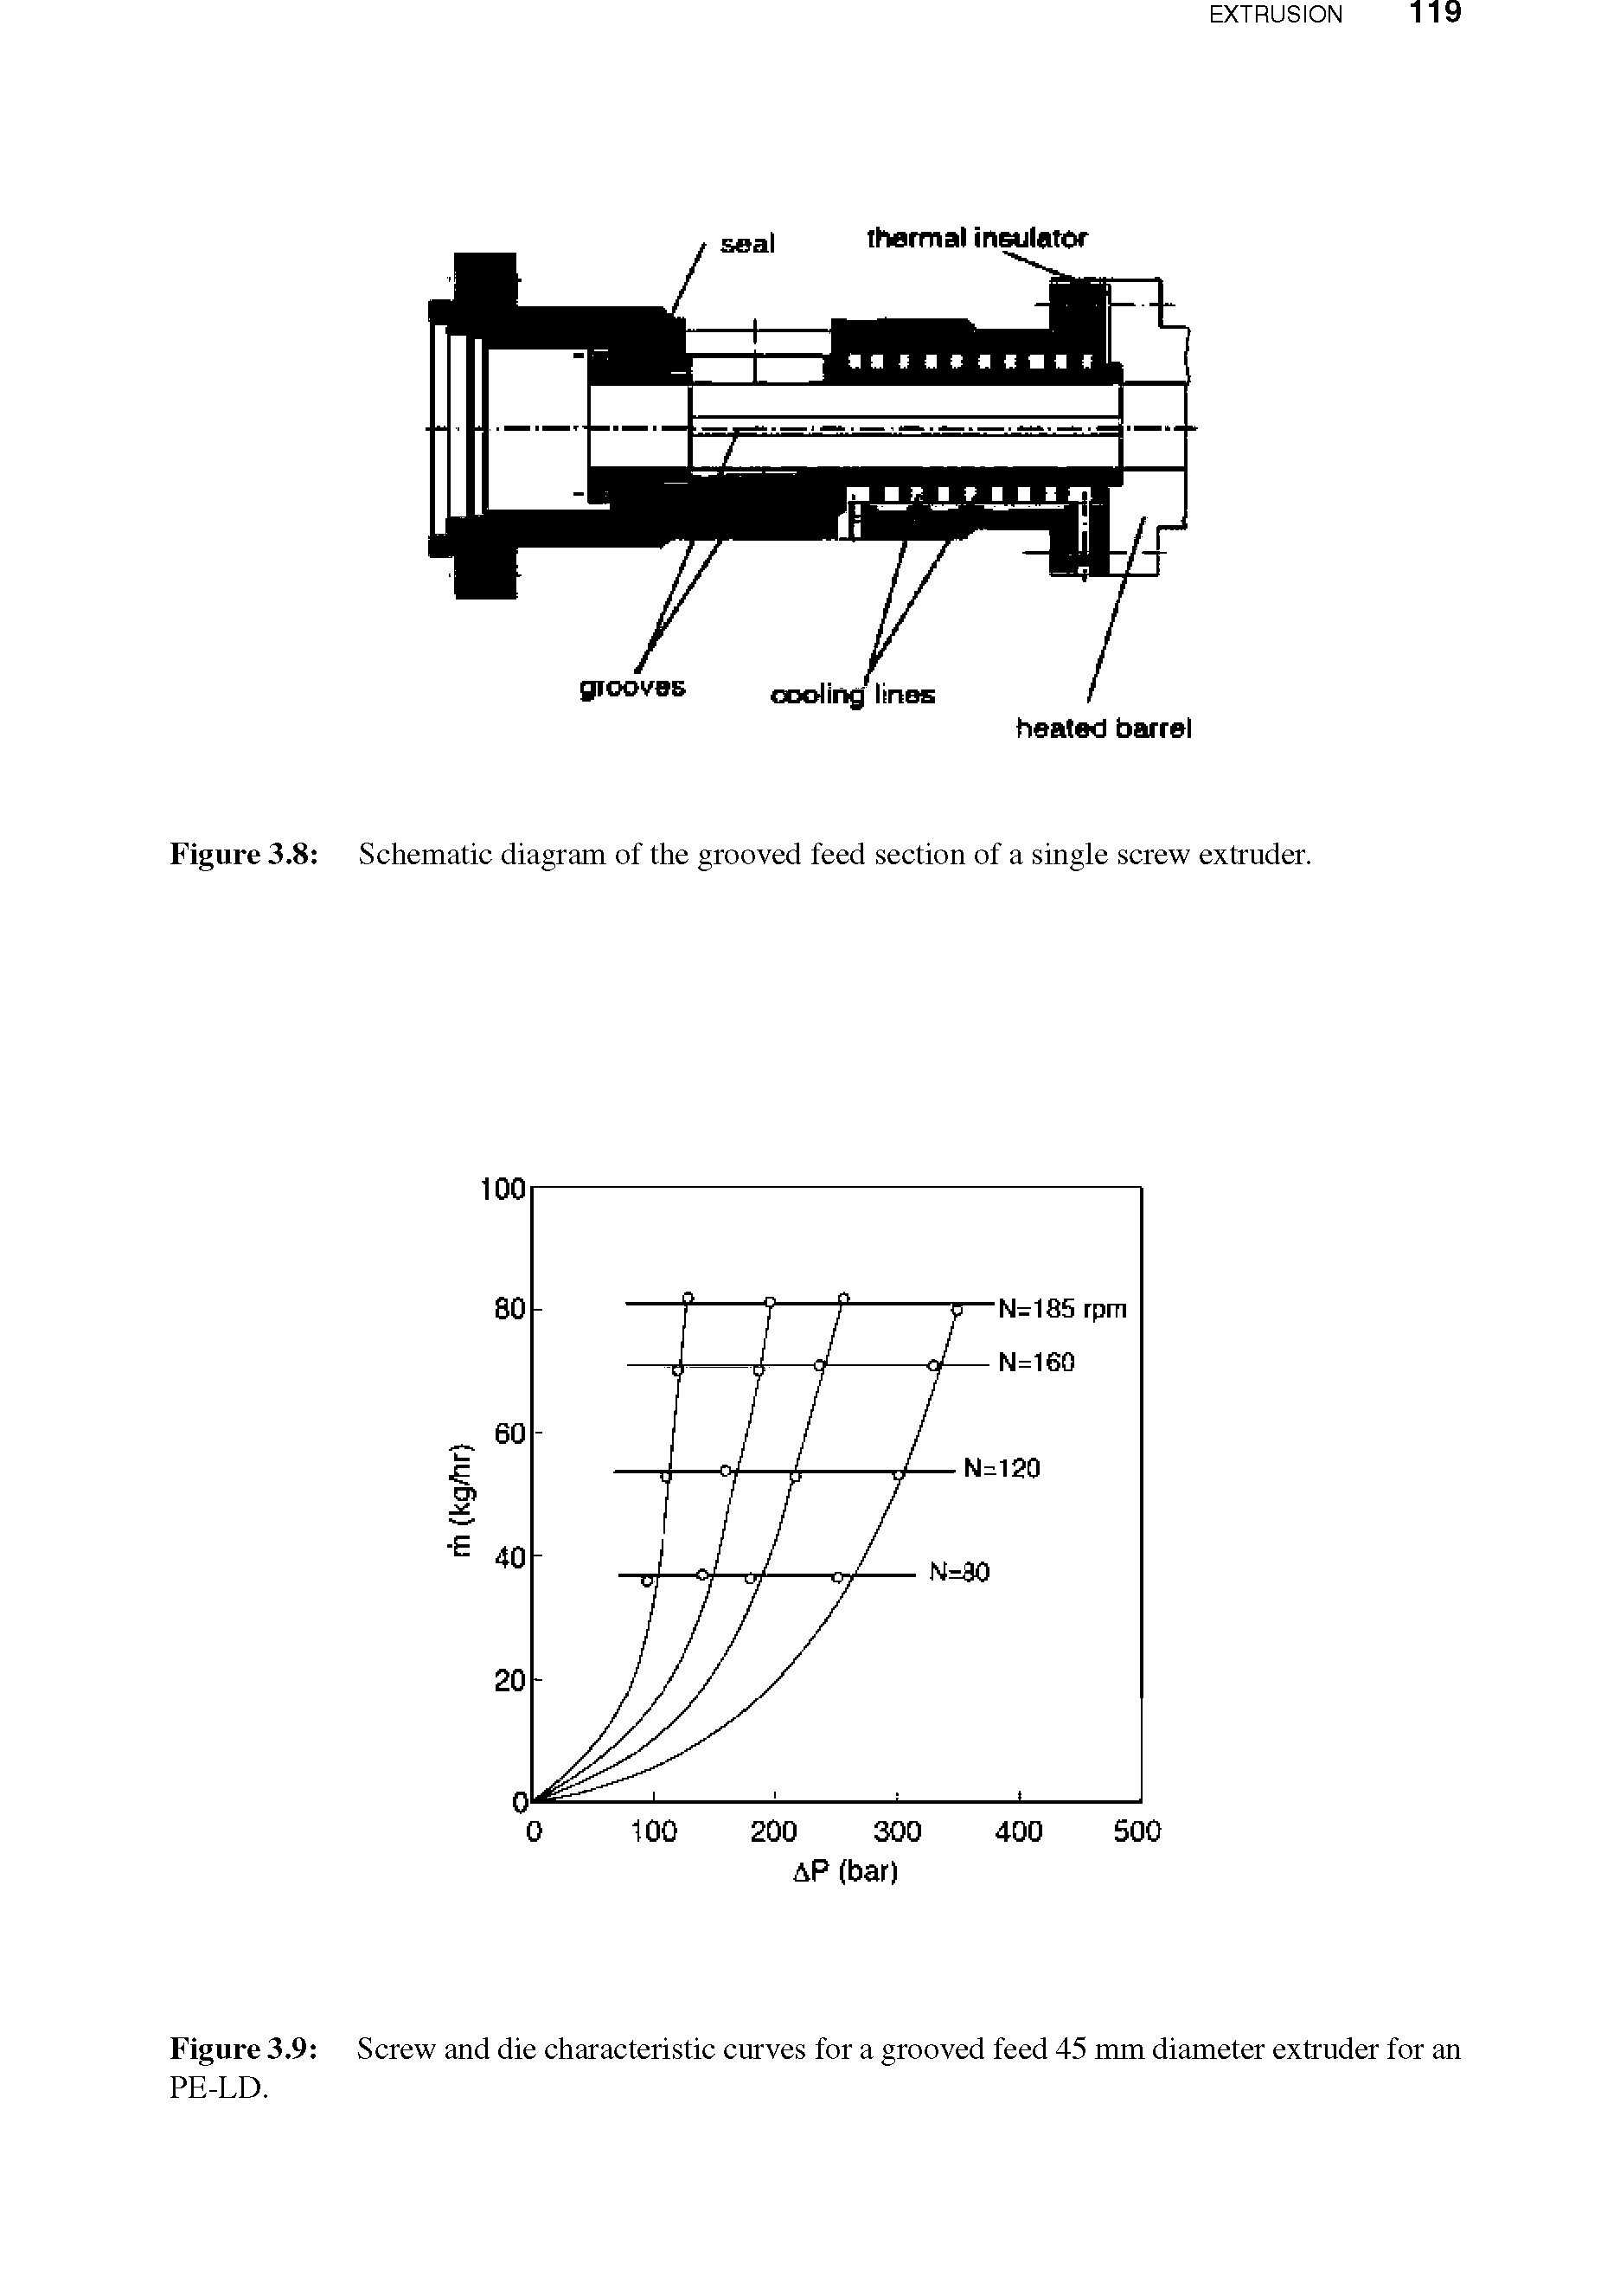 Figure 3.9 Screw and die characteristic curves for a grooved feed 45 mm diameter extruder for PE-LD.